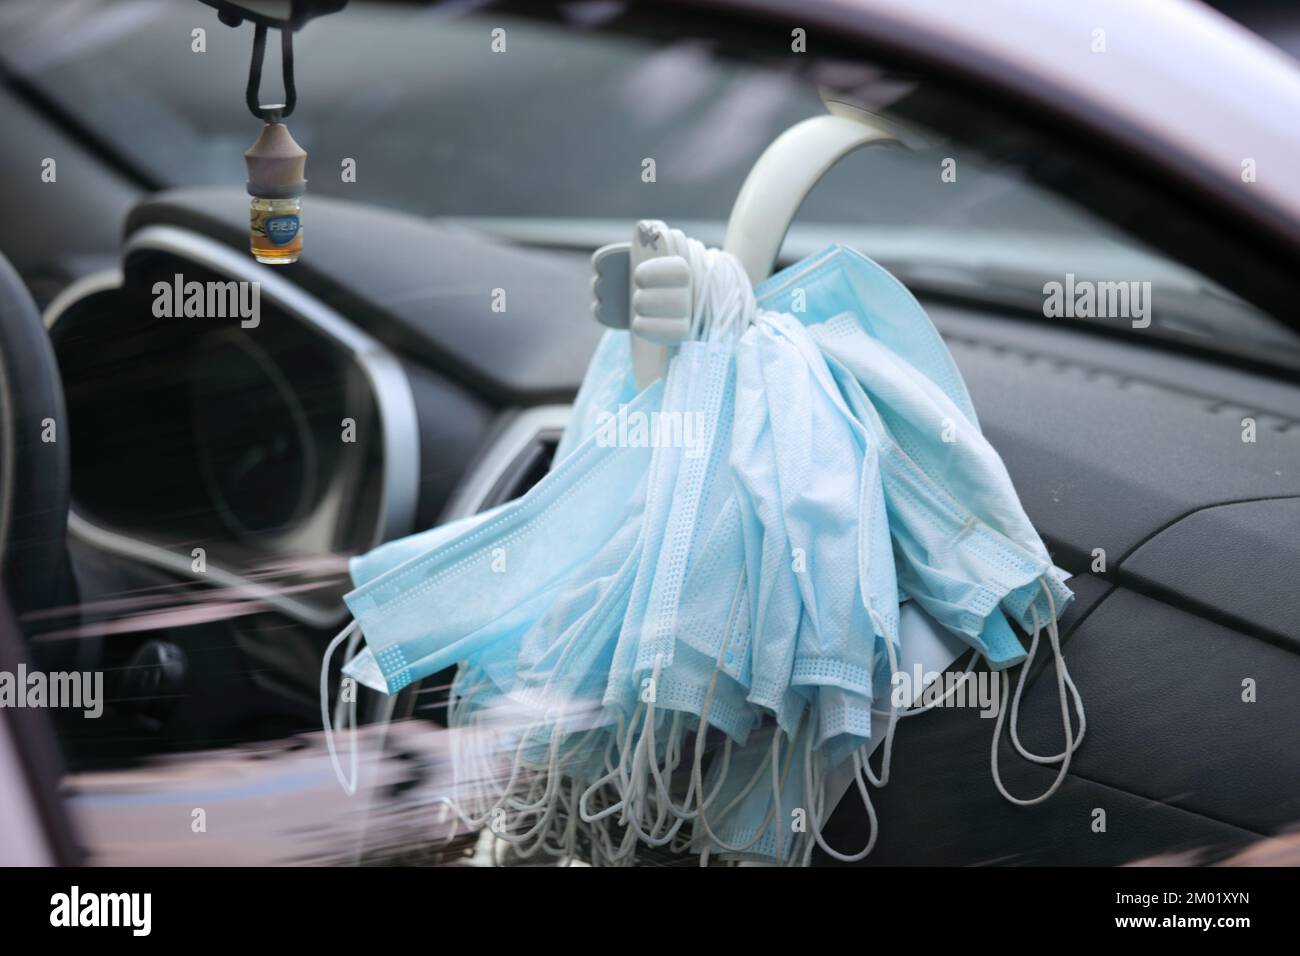 Bunch of medical face masks in a car Stock Photo